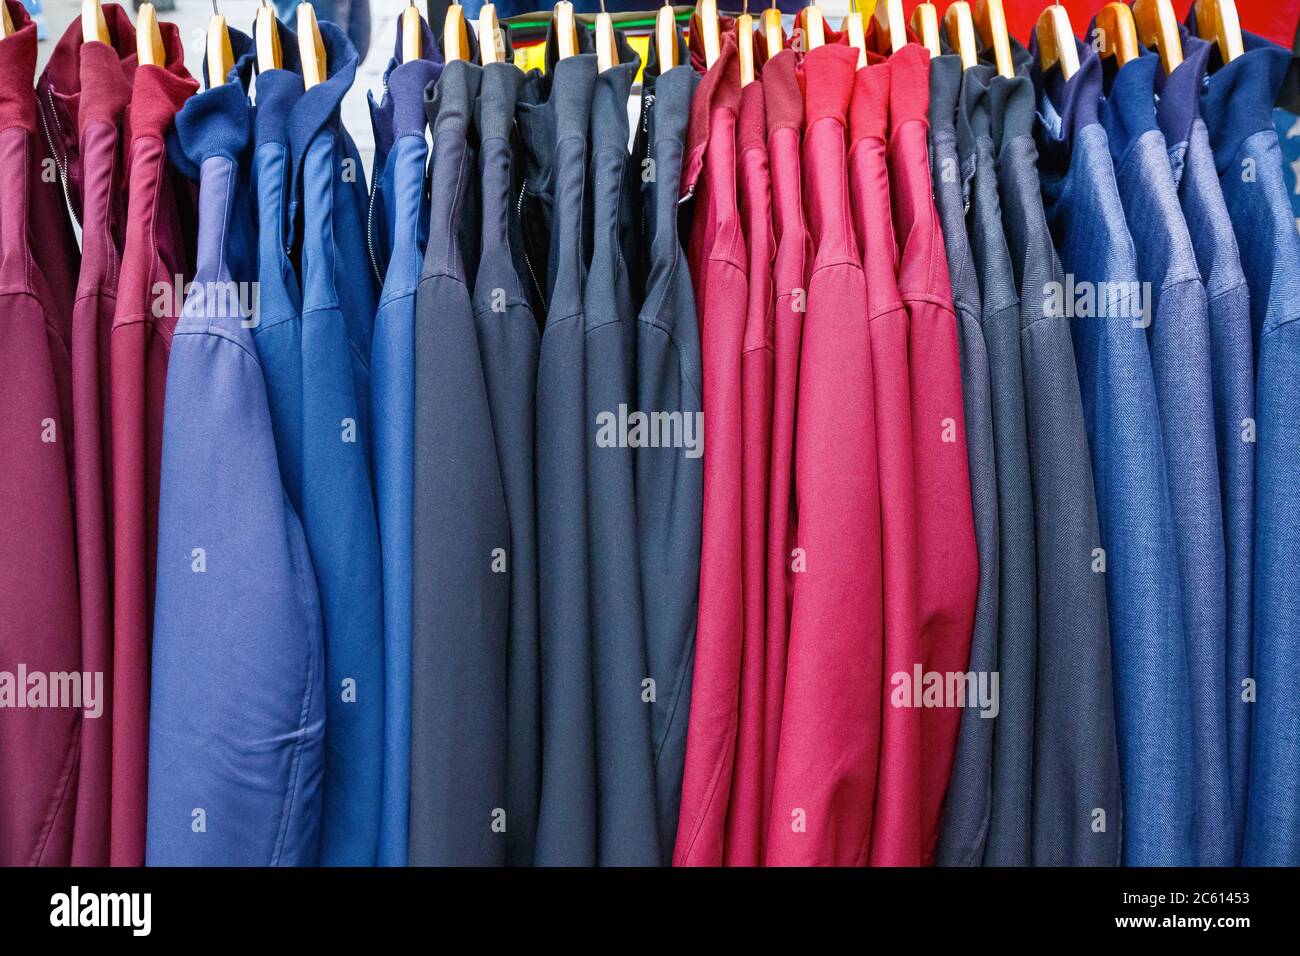 Rack of men jackets on display at Camden market in London Stock Photo